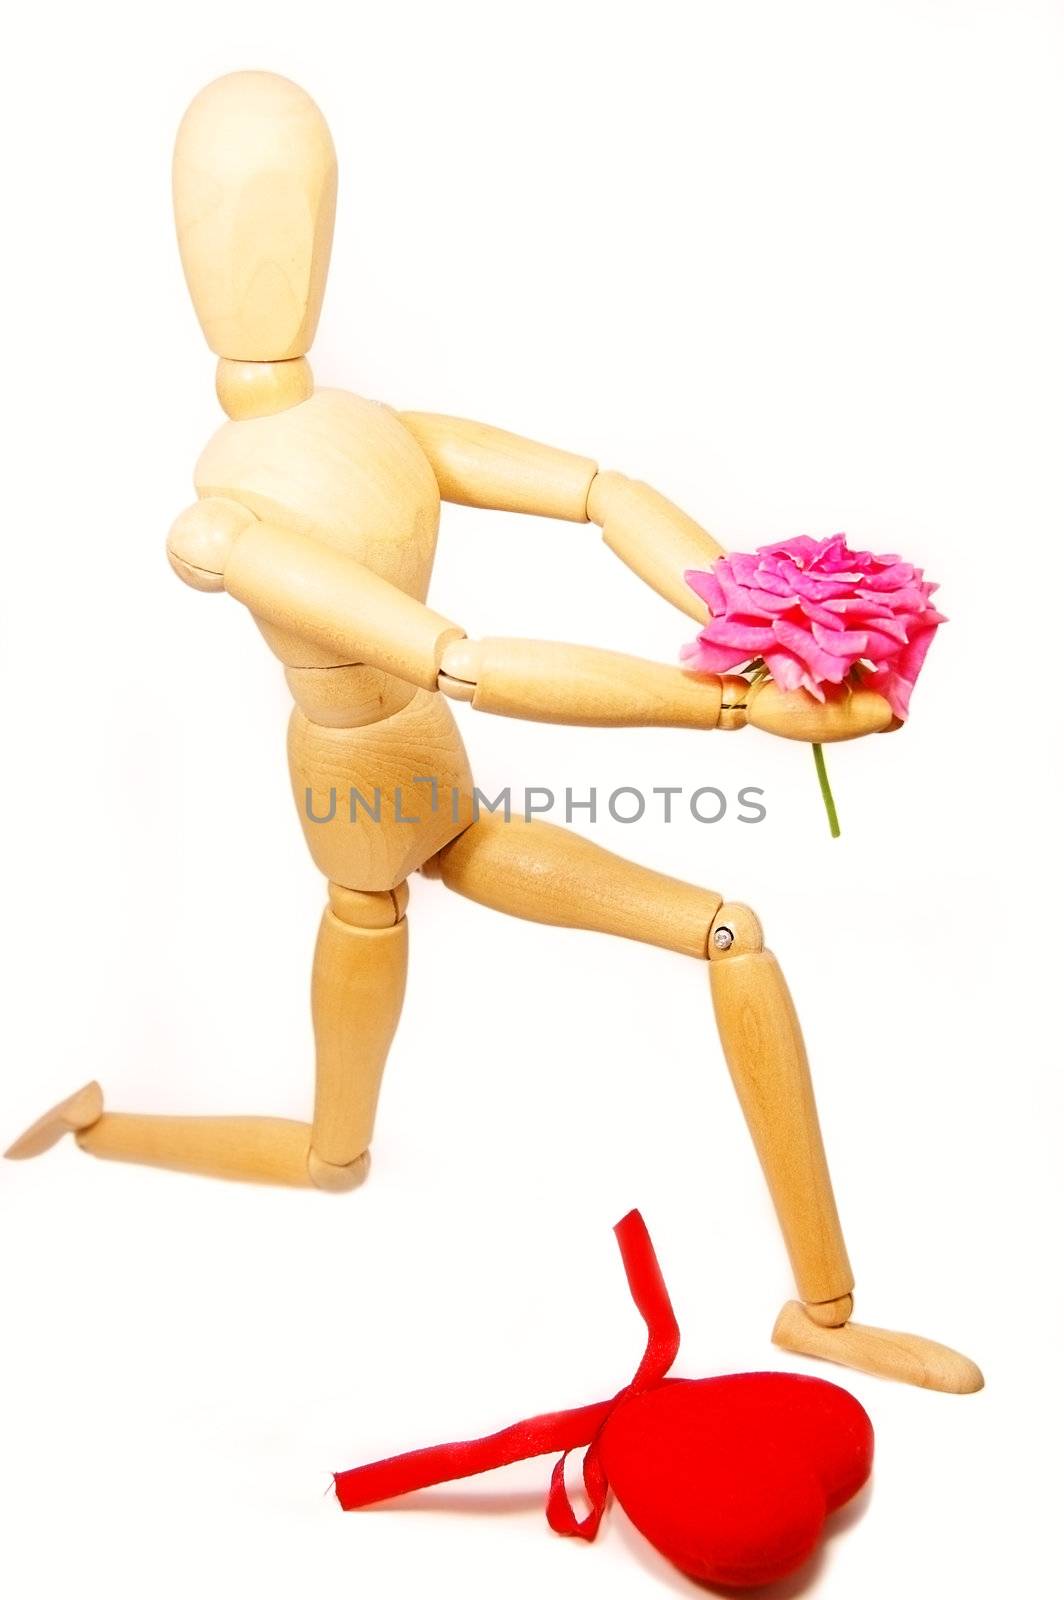 Wooden figurine man holding rose, standing on knees